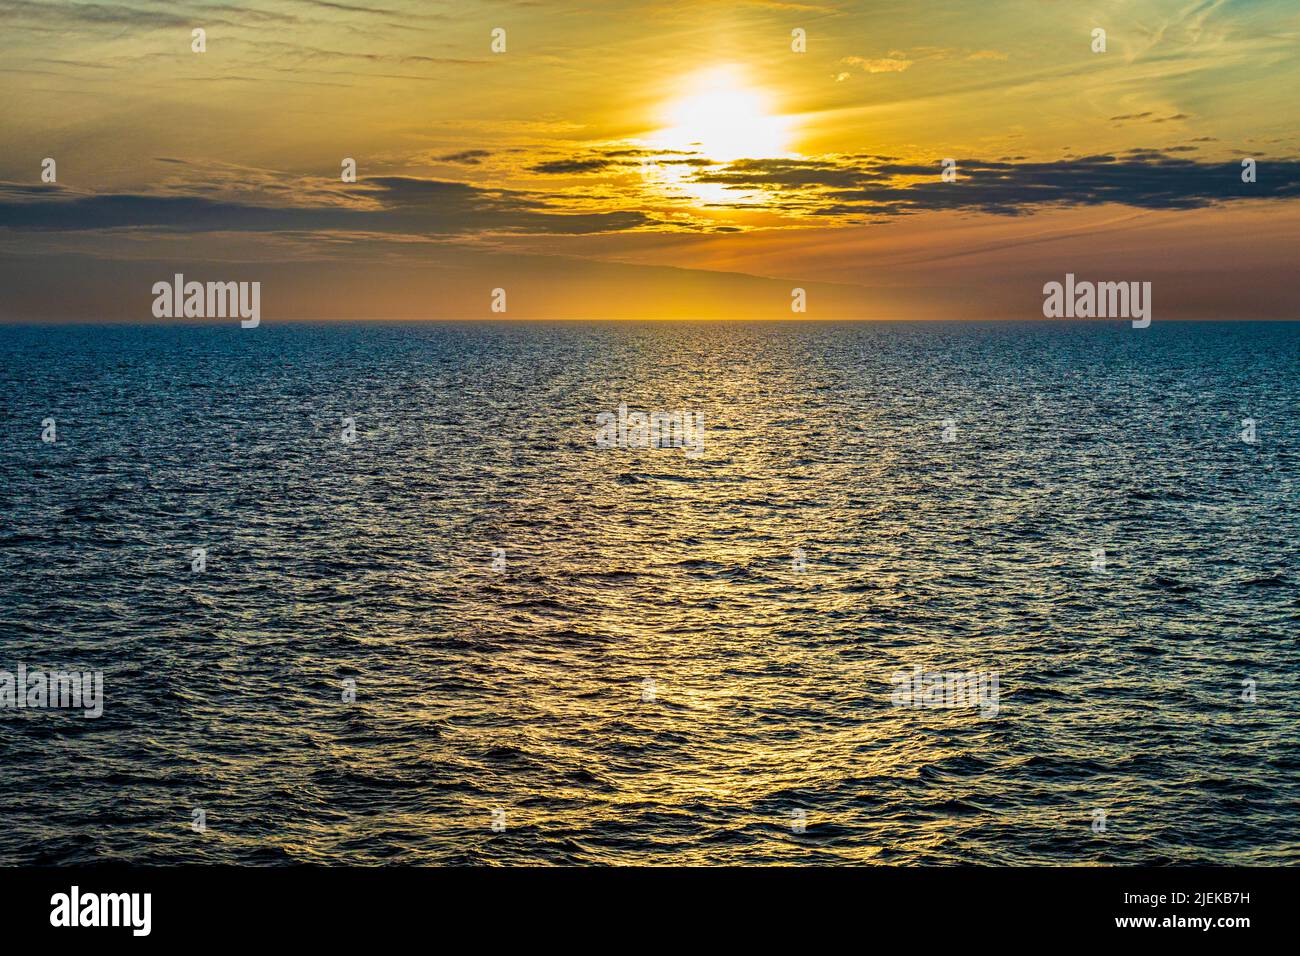 A summer sunset in the Baltic Sea off the coast of Sweden Stock Photo